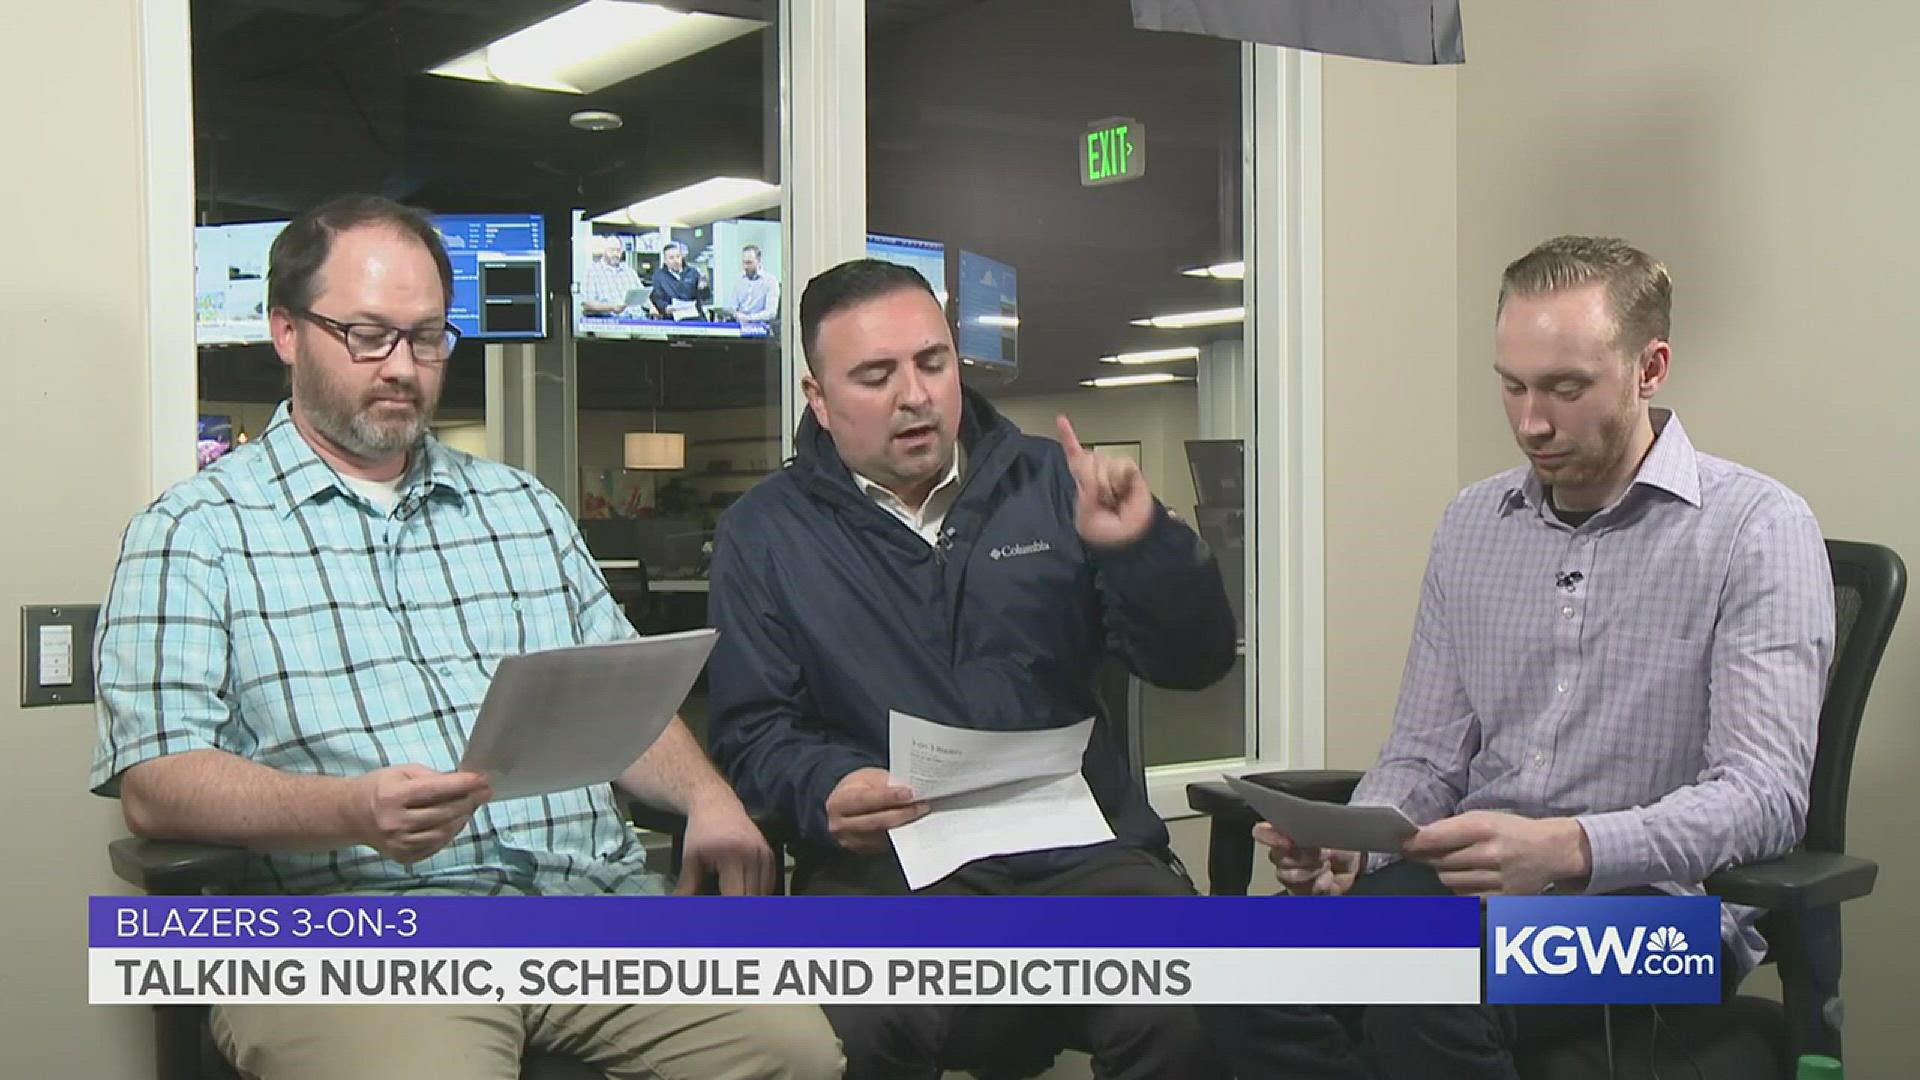 KGW's Jared Cowley, Orlando Sanchez and Nate Hanson talk about their expectation for the Portland Trail Blazers in the second half of the 2017-18 season.